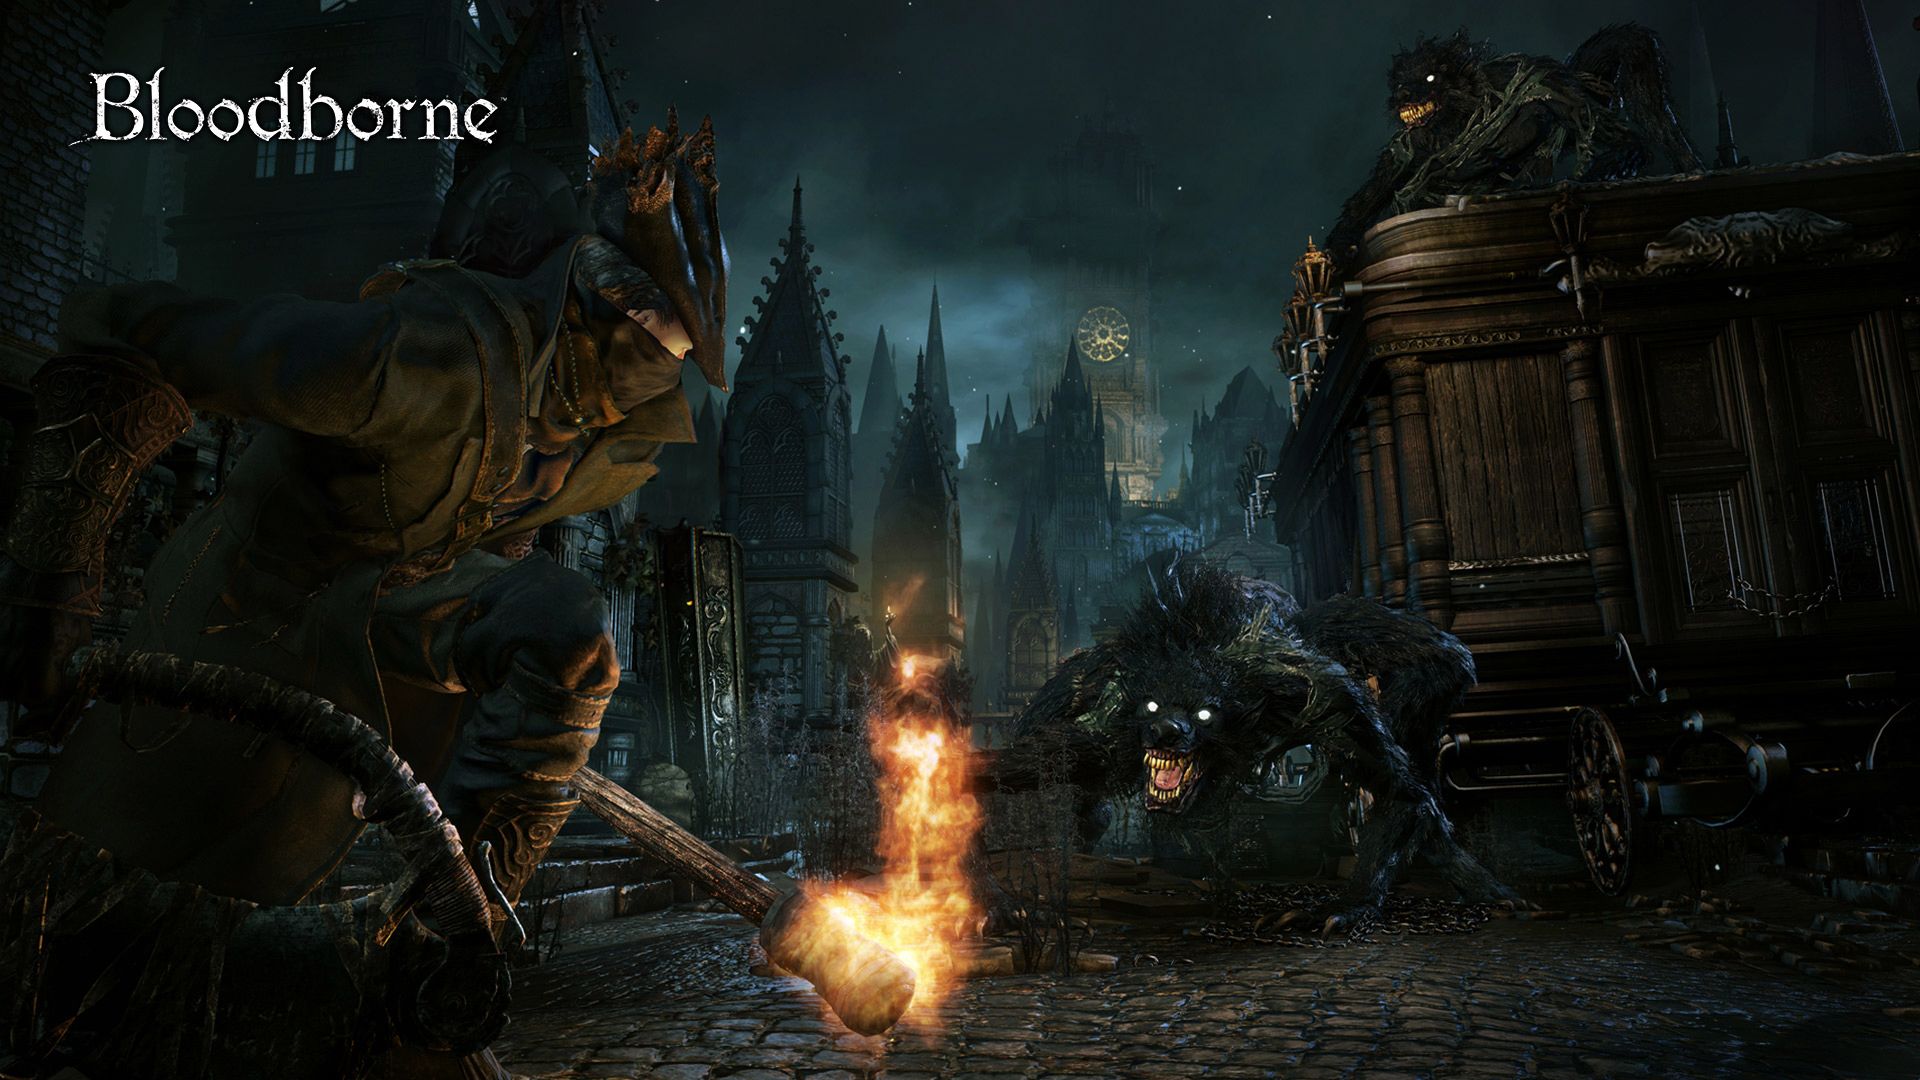 Free download Bloodborne PS4 Game HD Wallpaper [1920x1080] for your Desktop, Mobile & Tablet. Explore PS4 Wallpaper HD 1080p. Ps3 HD Wallpaper, Ps3 Wallpaper 1080p, PlayStation 4 Wallpaper HD